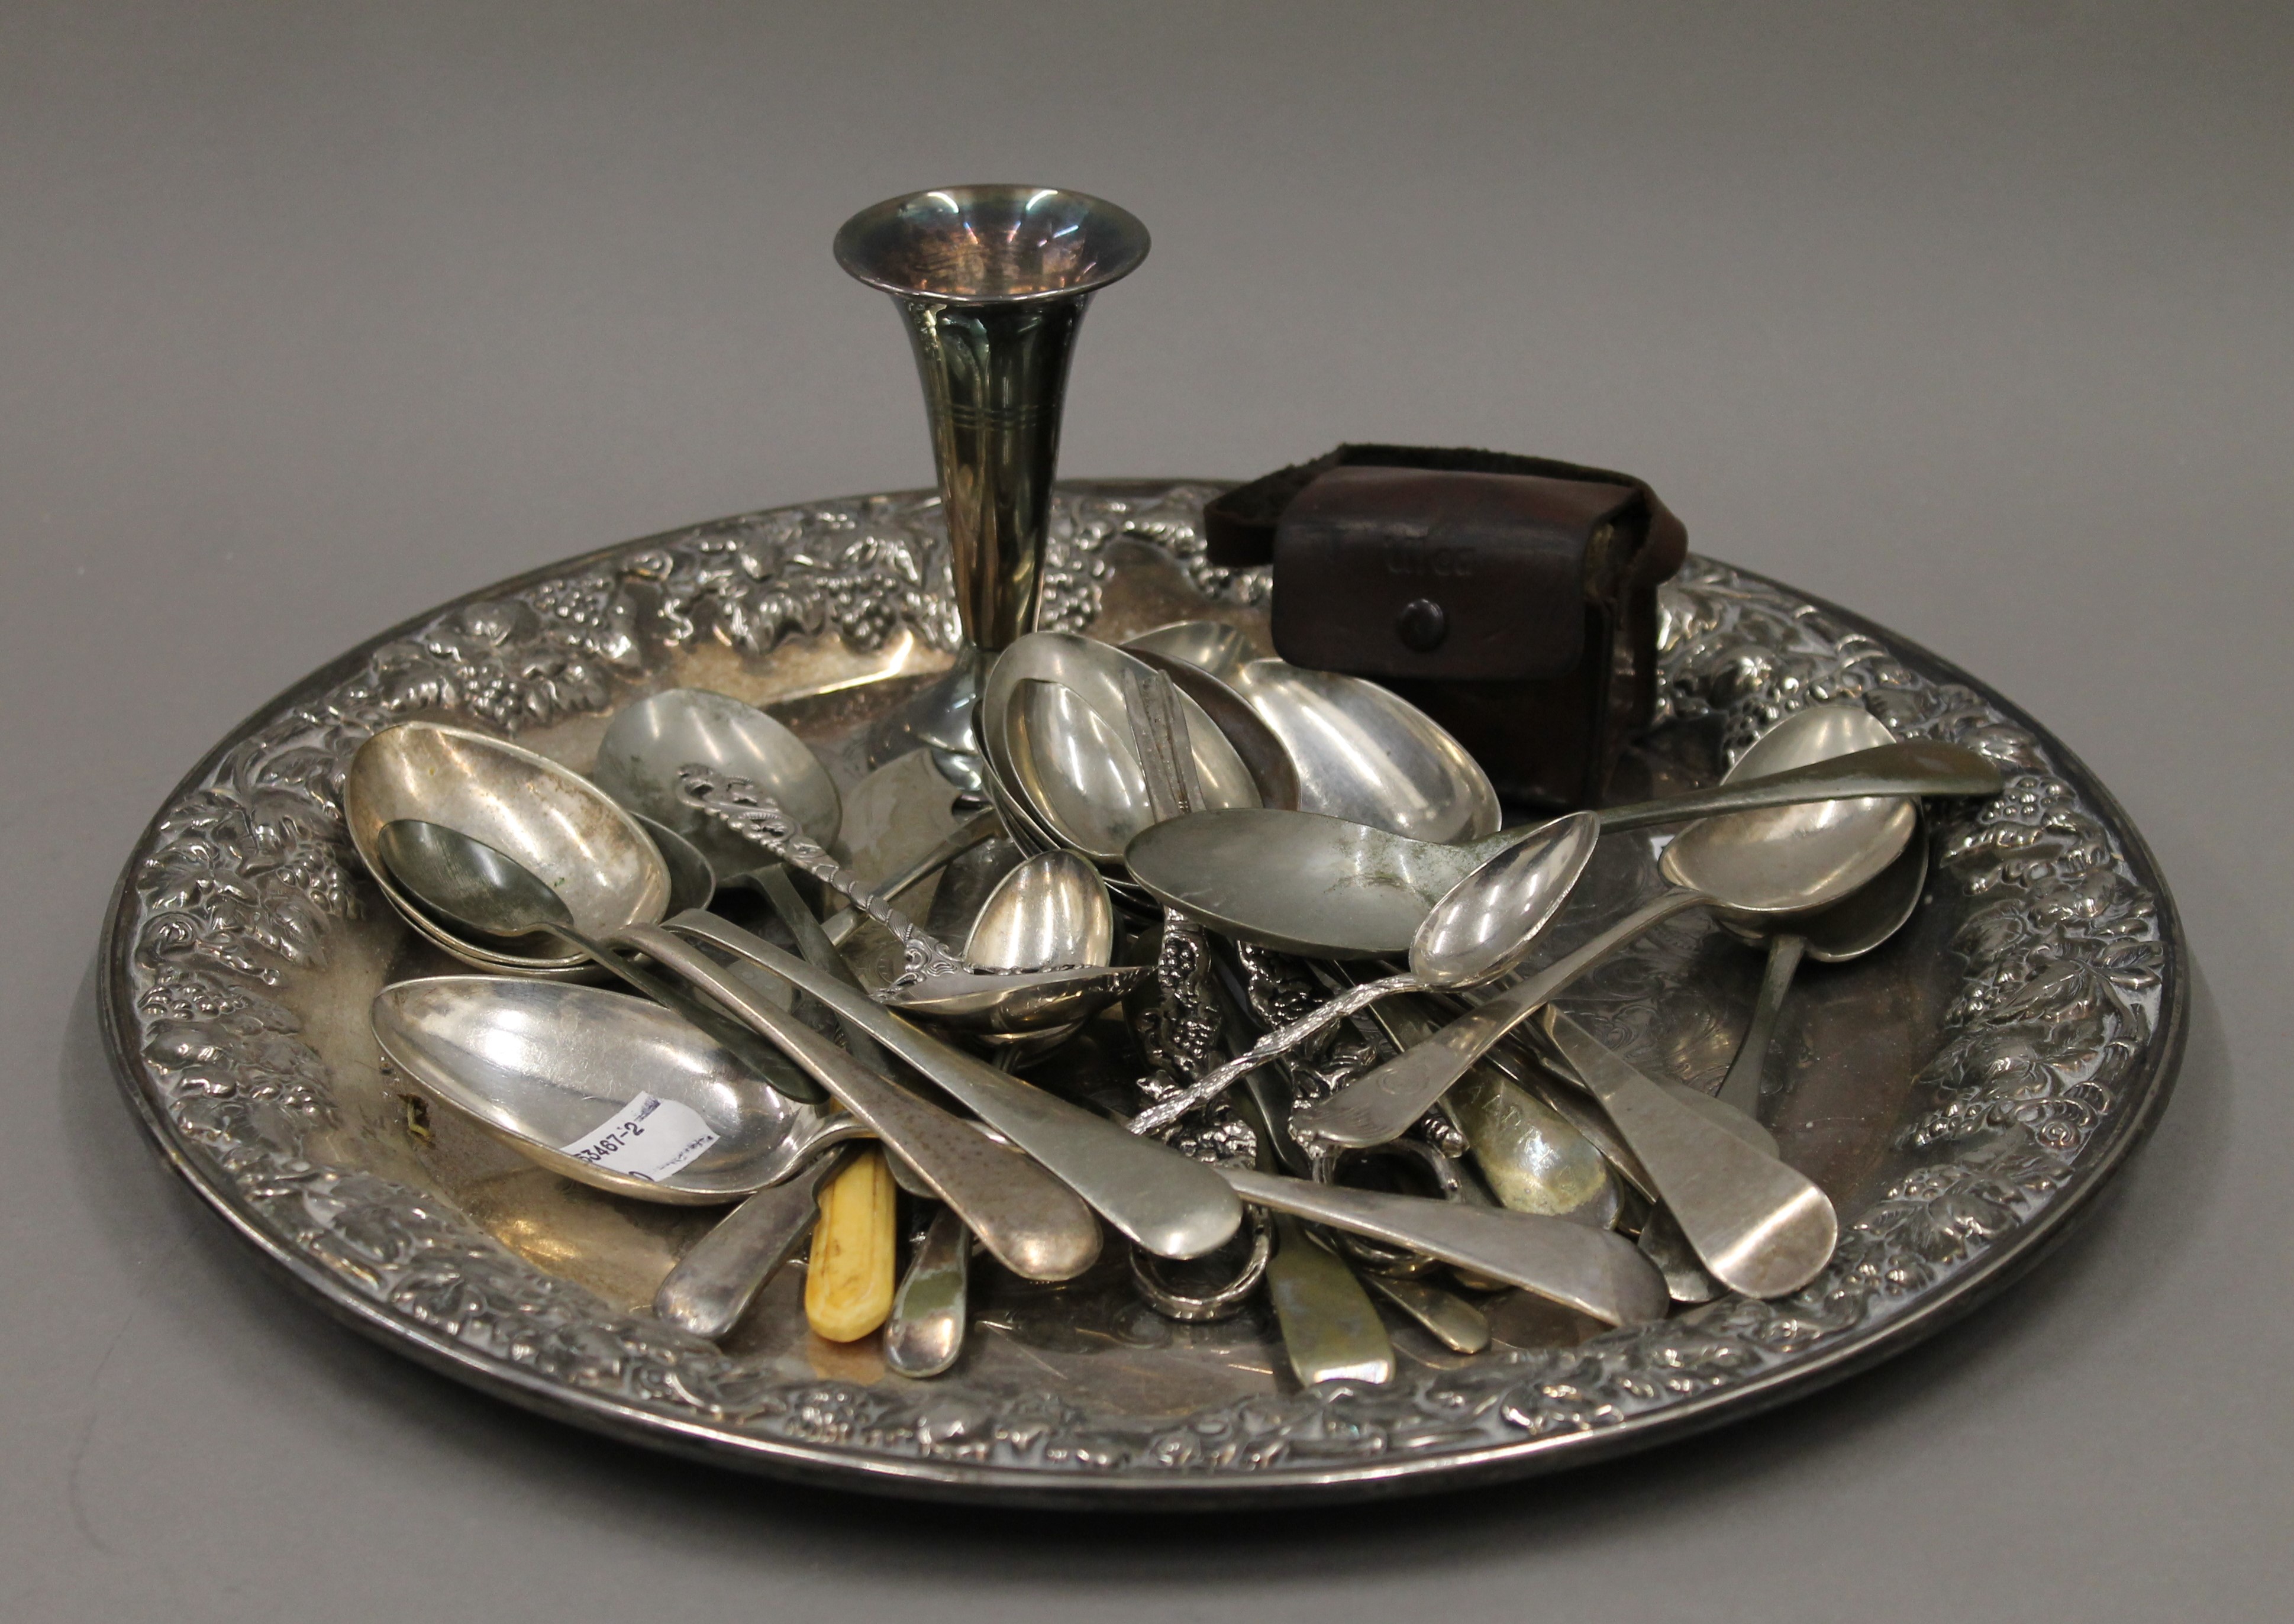 A small quantity of silver plate, an 830 silver spoon and a miniature camera.